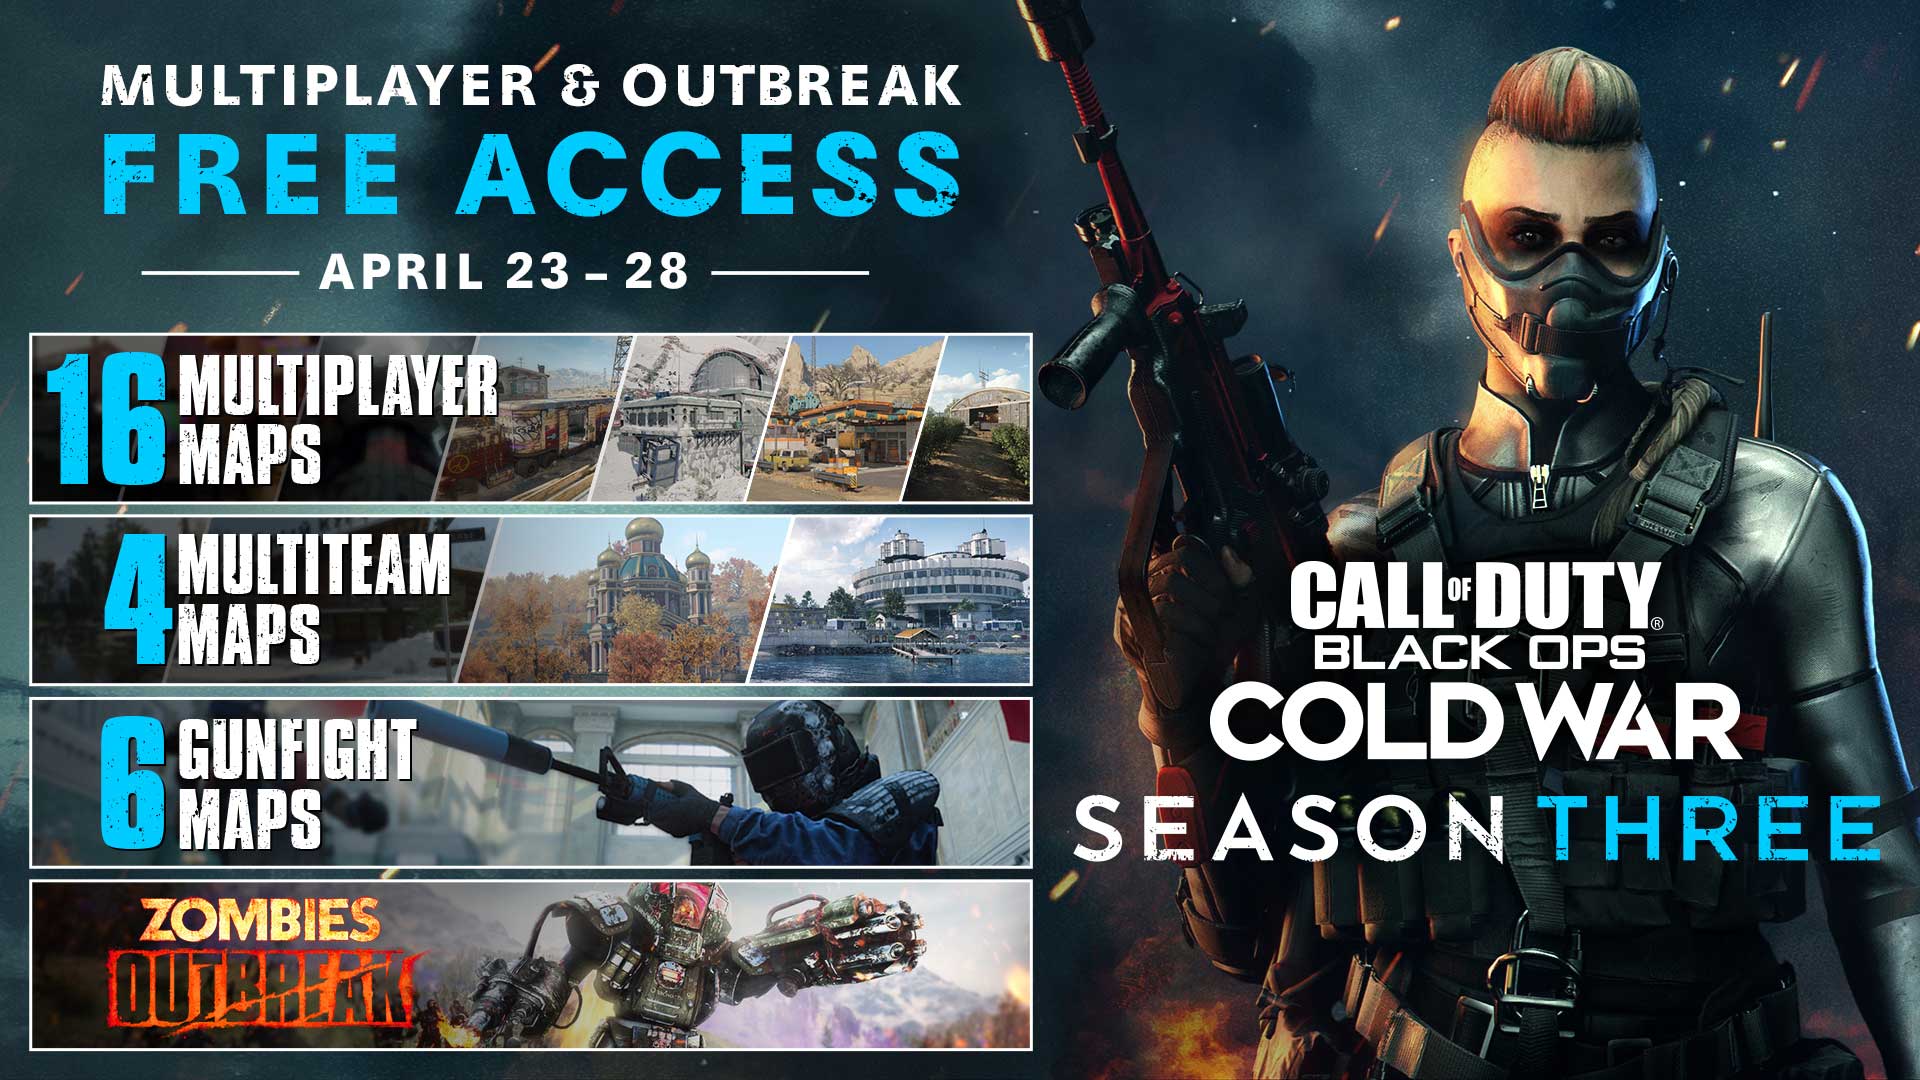 Play Season Three for free starting April 23 in Call of Duty: Black Ops Cold War